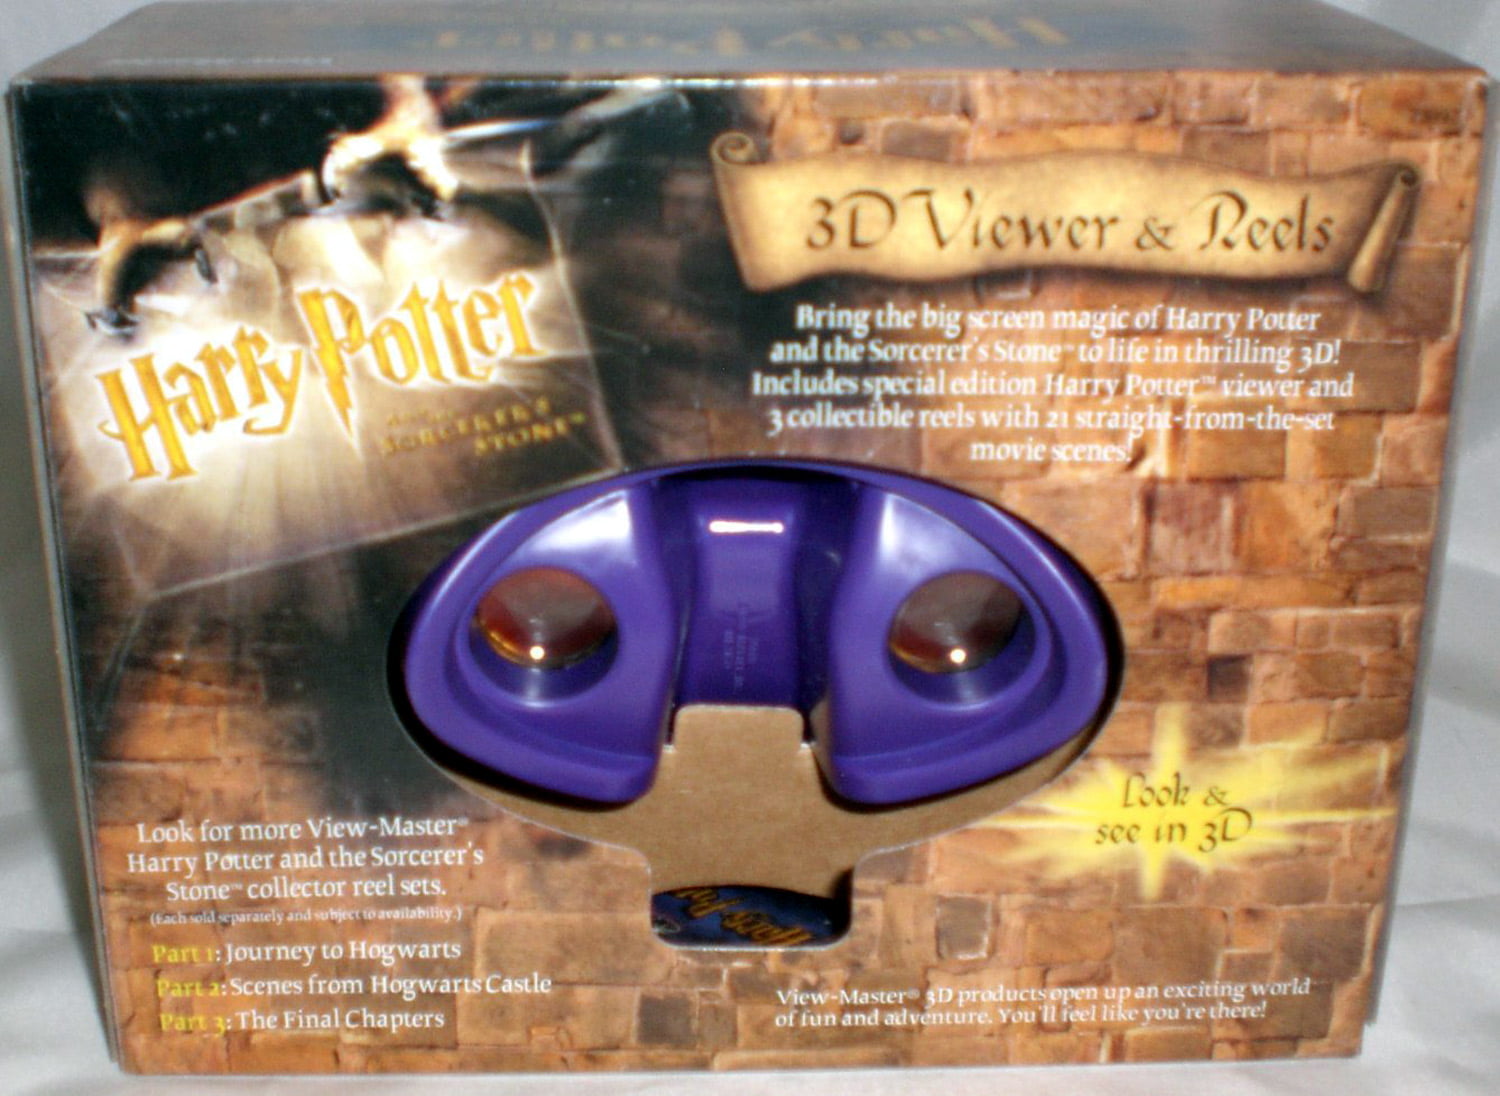 Sorcerers Stone Virtual Viewer and 3 Reels ViewMaster Gift Set Harry Potter 